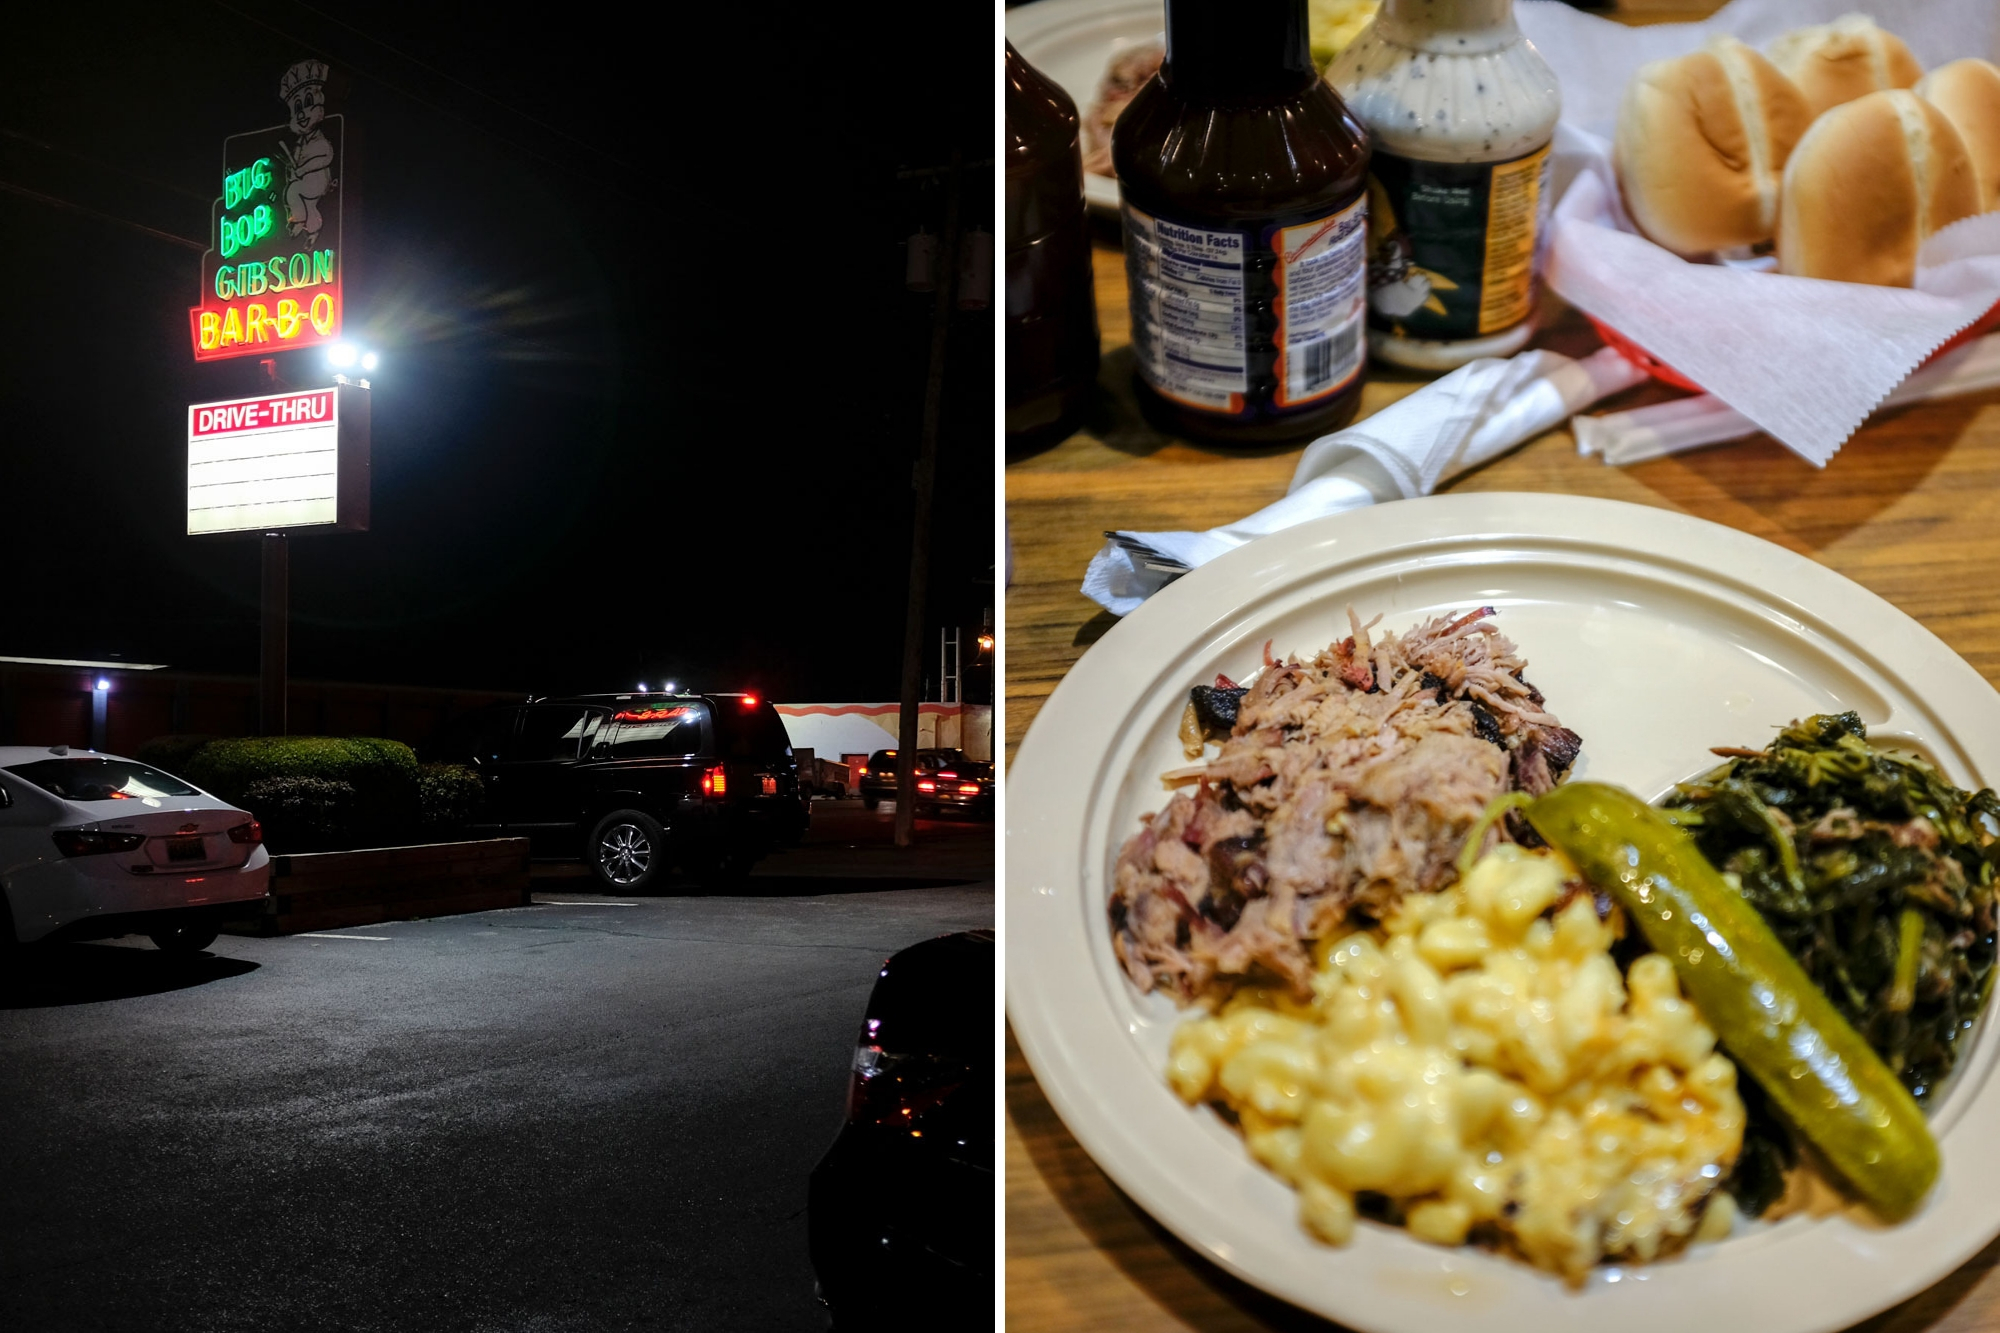 Collage: Outside of Big Bob Gibson's restaurant and bbq plate